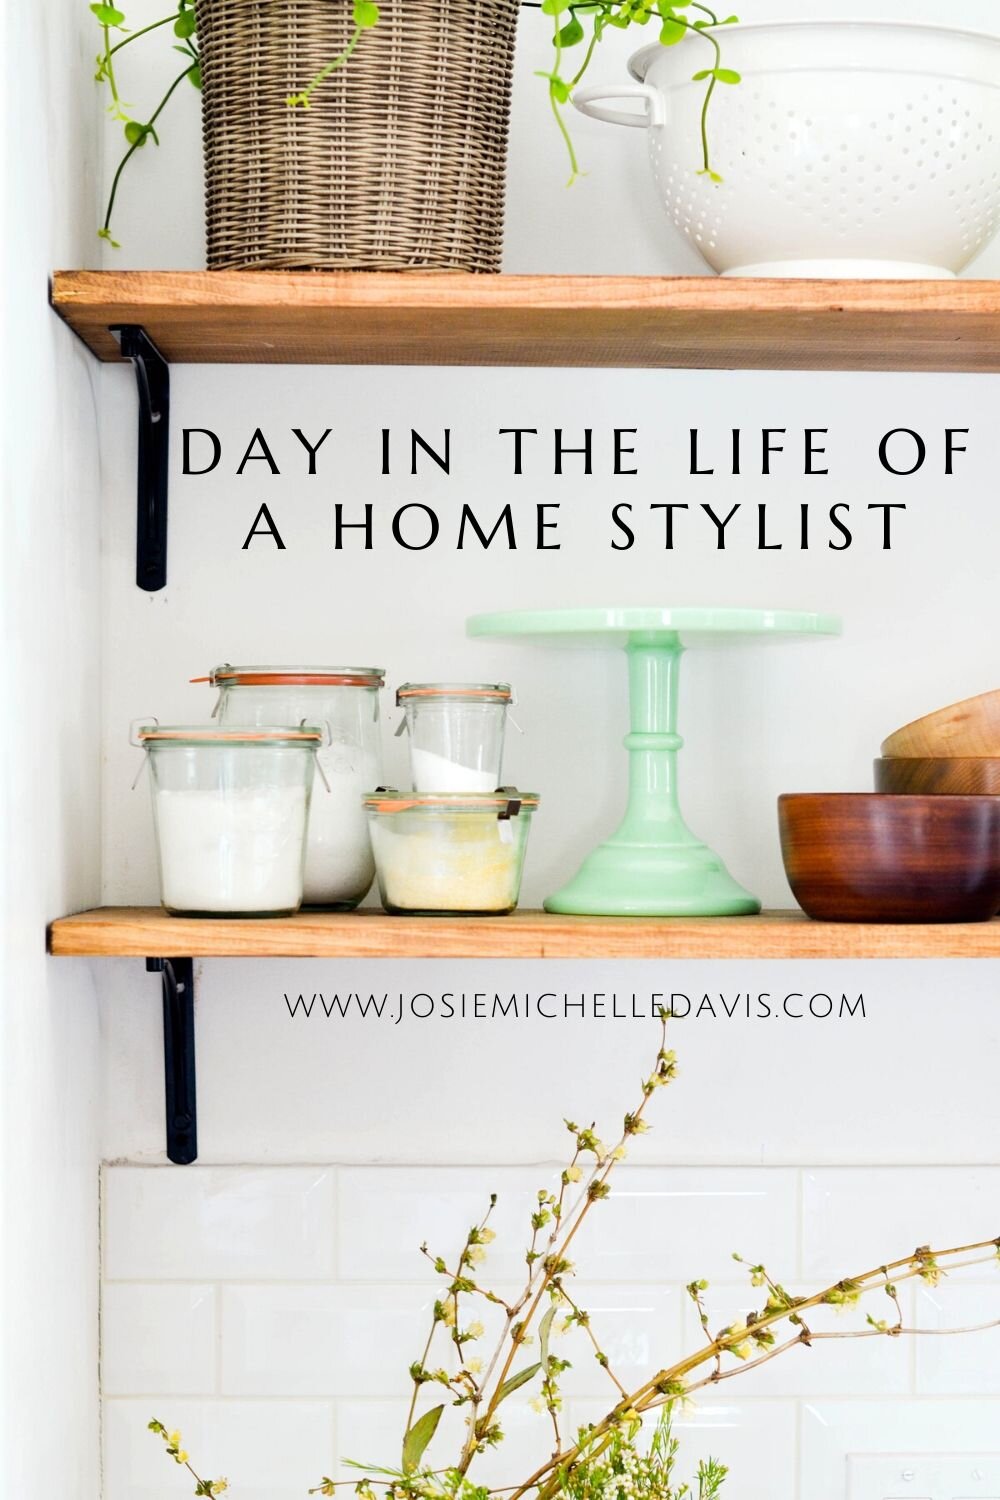 Day in the life of a Home Stylist - Josie Davis Blog